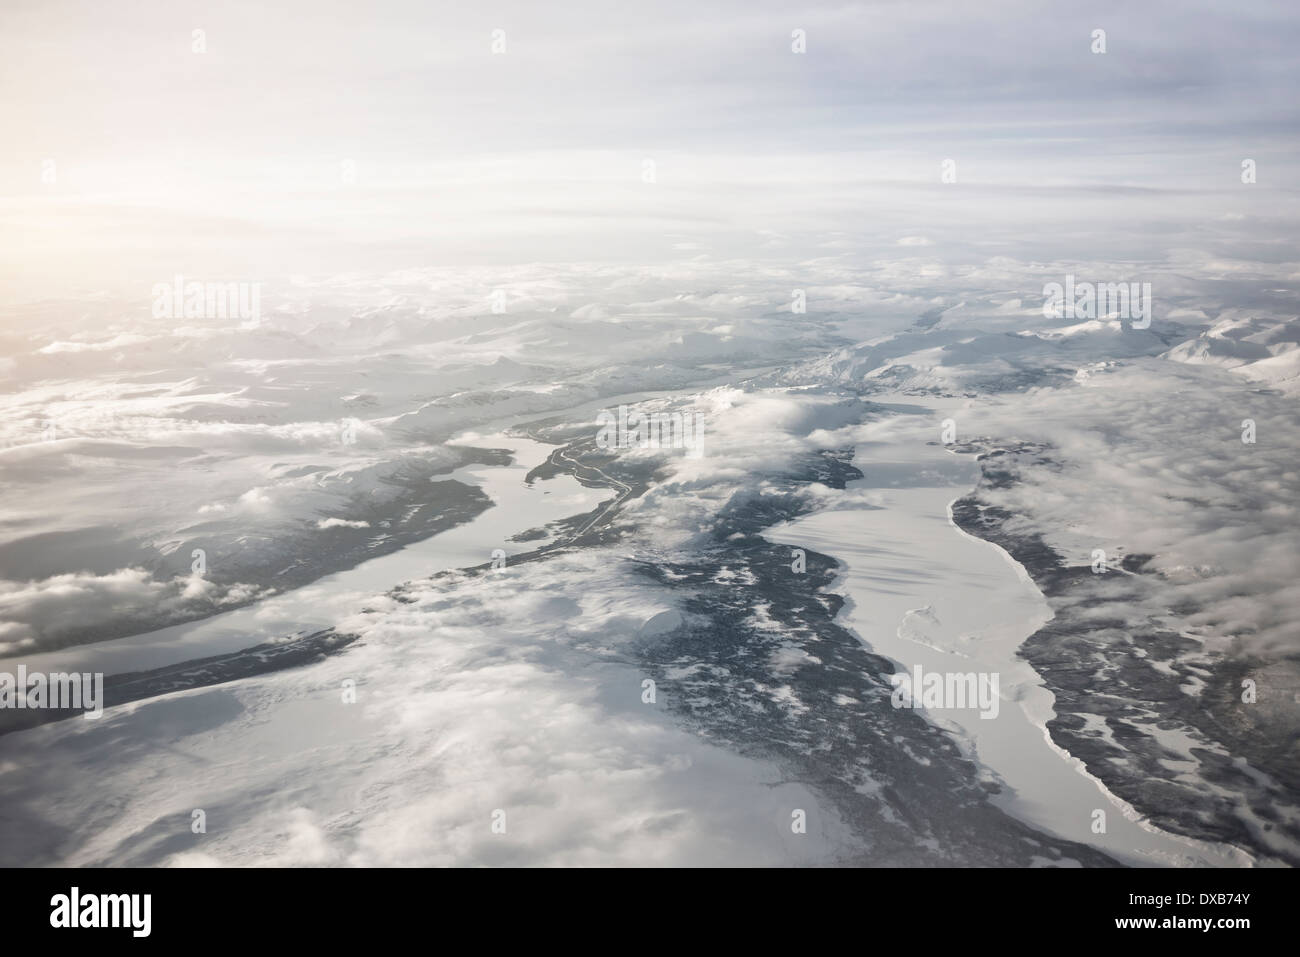 Majestic aerial view of frozen Northern Sweden. High mountain ranges and frozen rivers and lakes with low clouds. Stock Photo